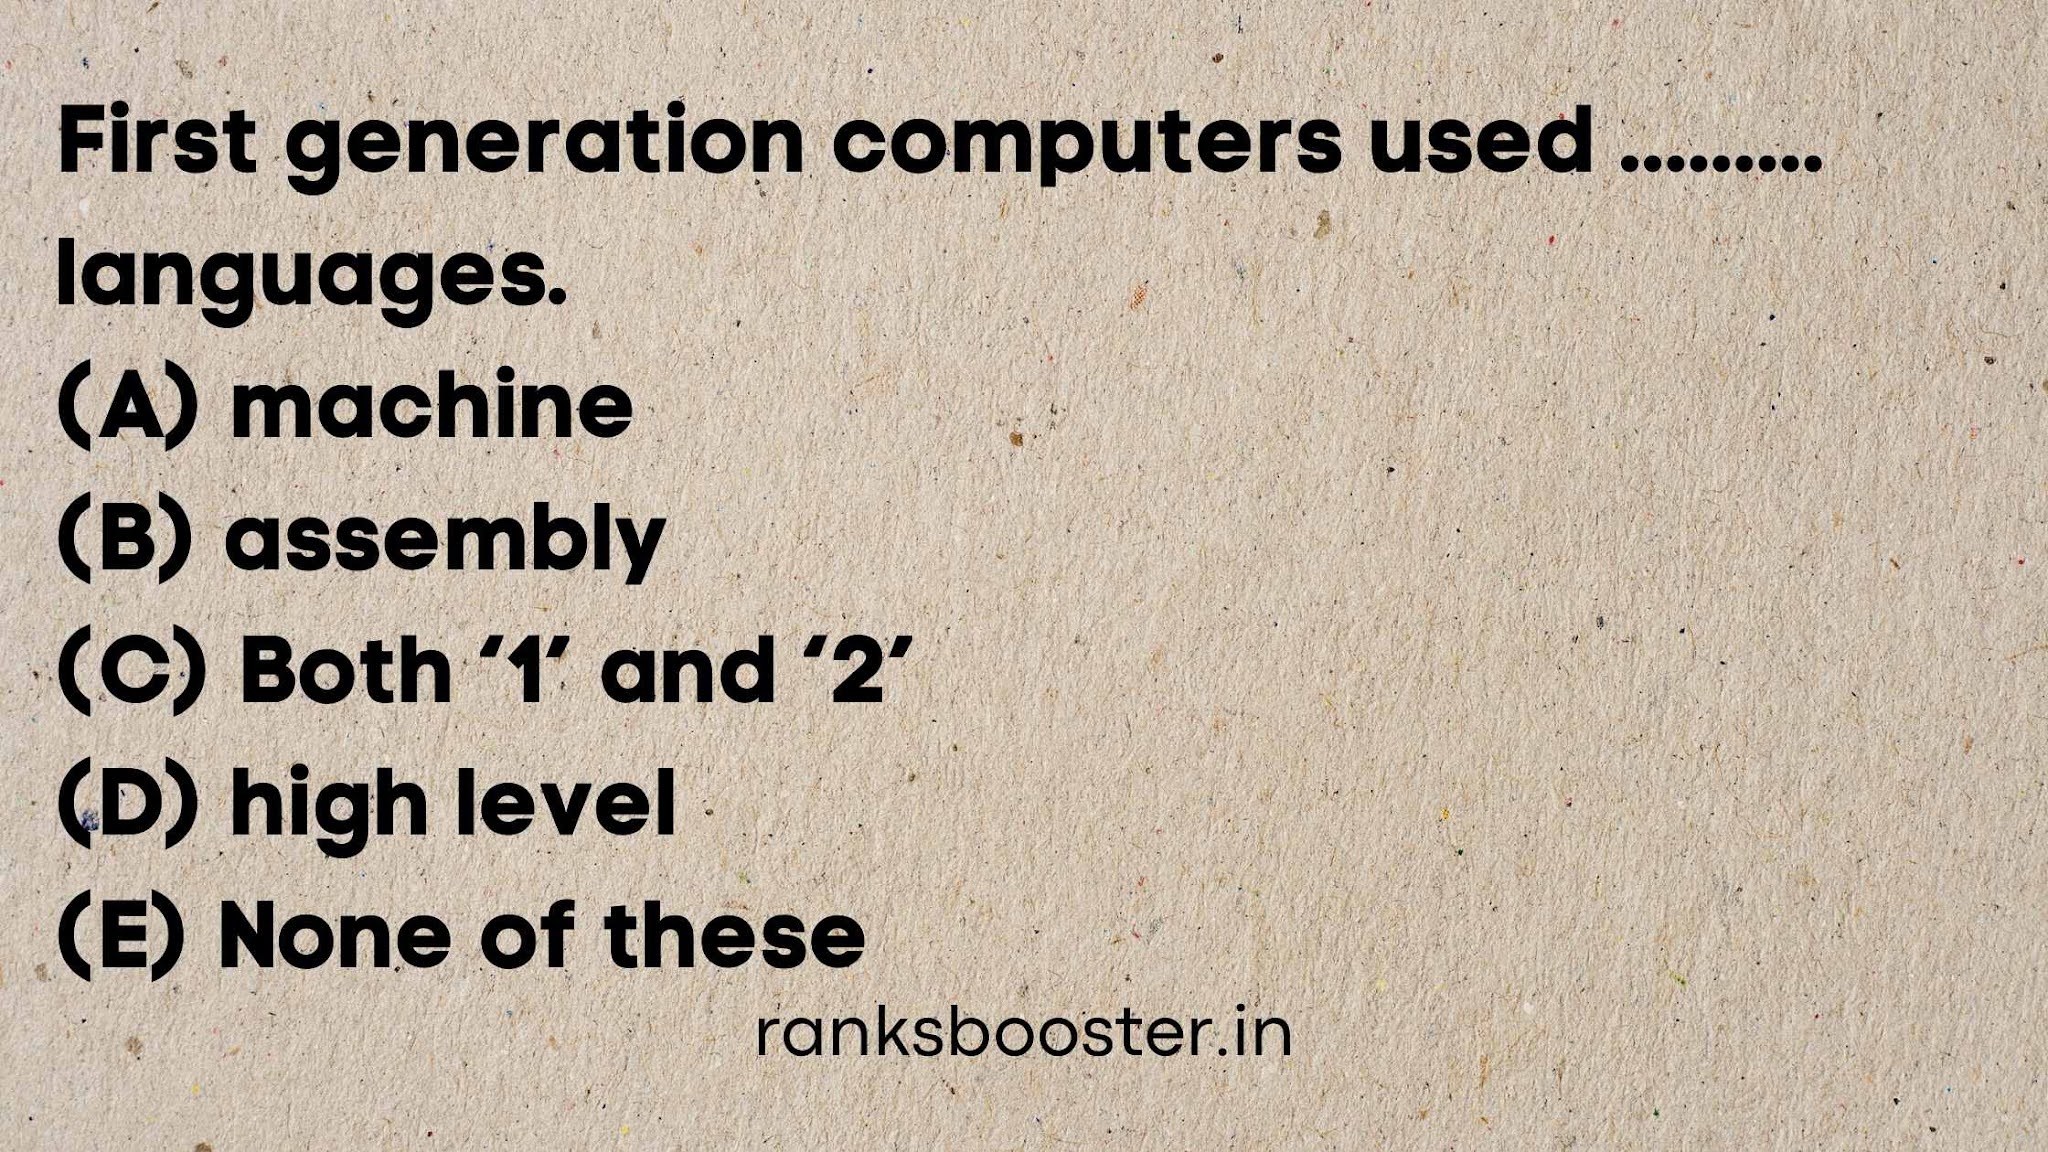 First generation computers used languages. (A) machine (B) assembly (C) Both ‘1’ and ‘2’ (D) high level (E) None of these